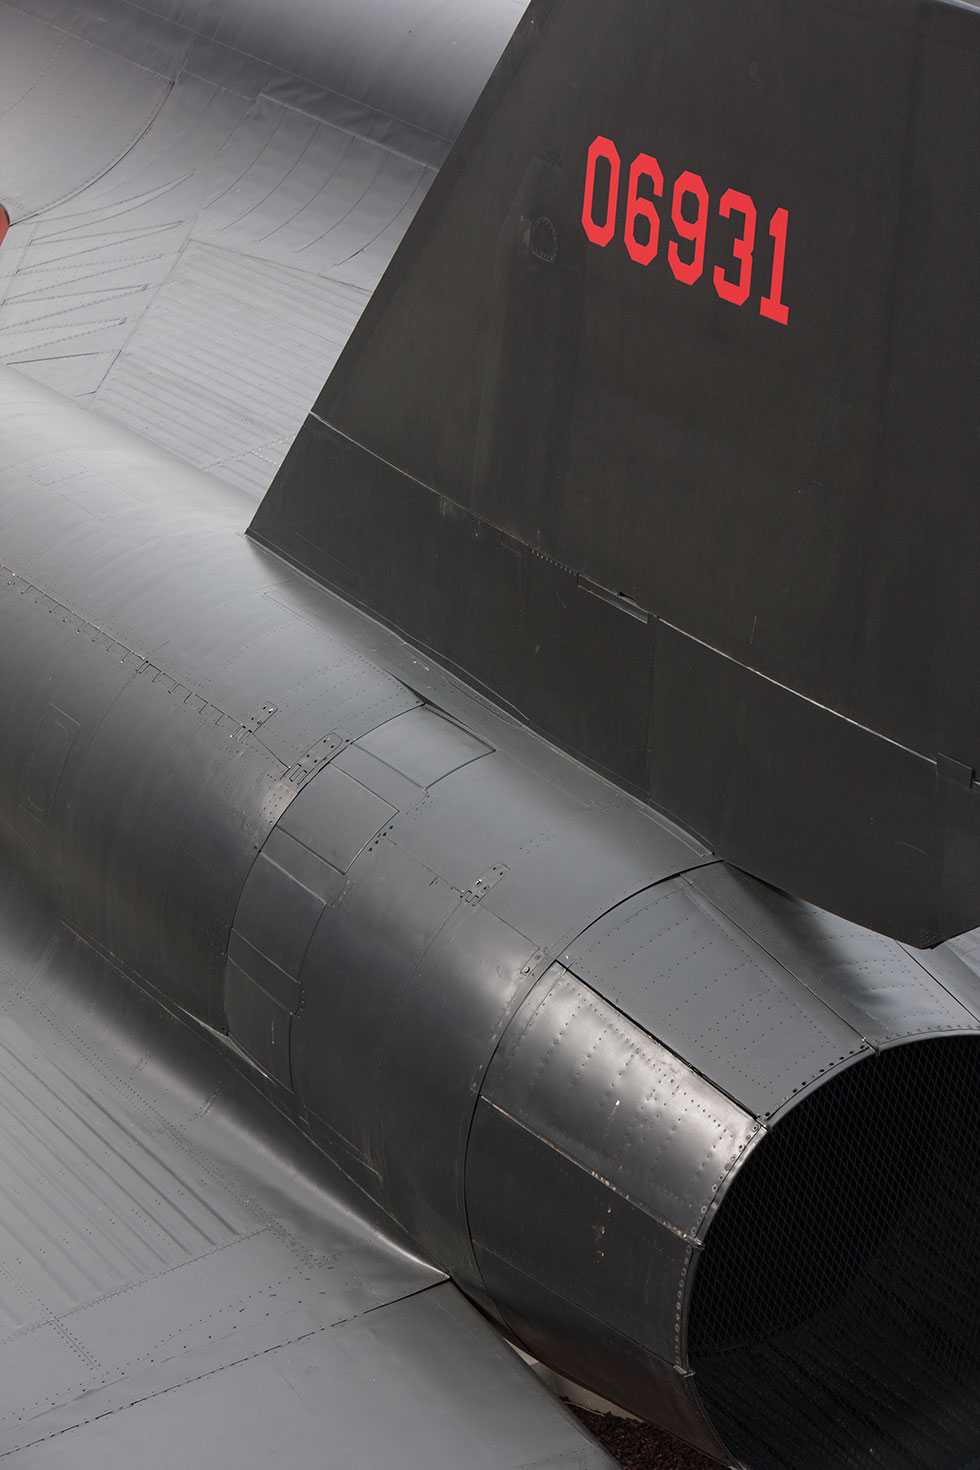 A close up shot of the tail of the A-12 Oxcart, with the red numbers 06931 on it.